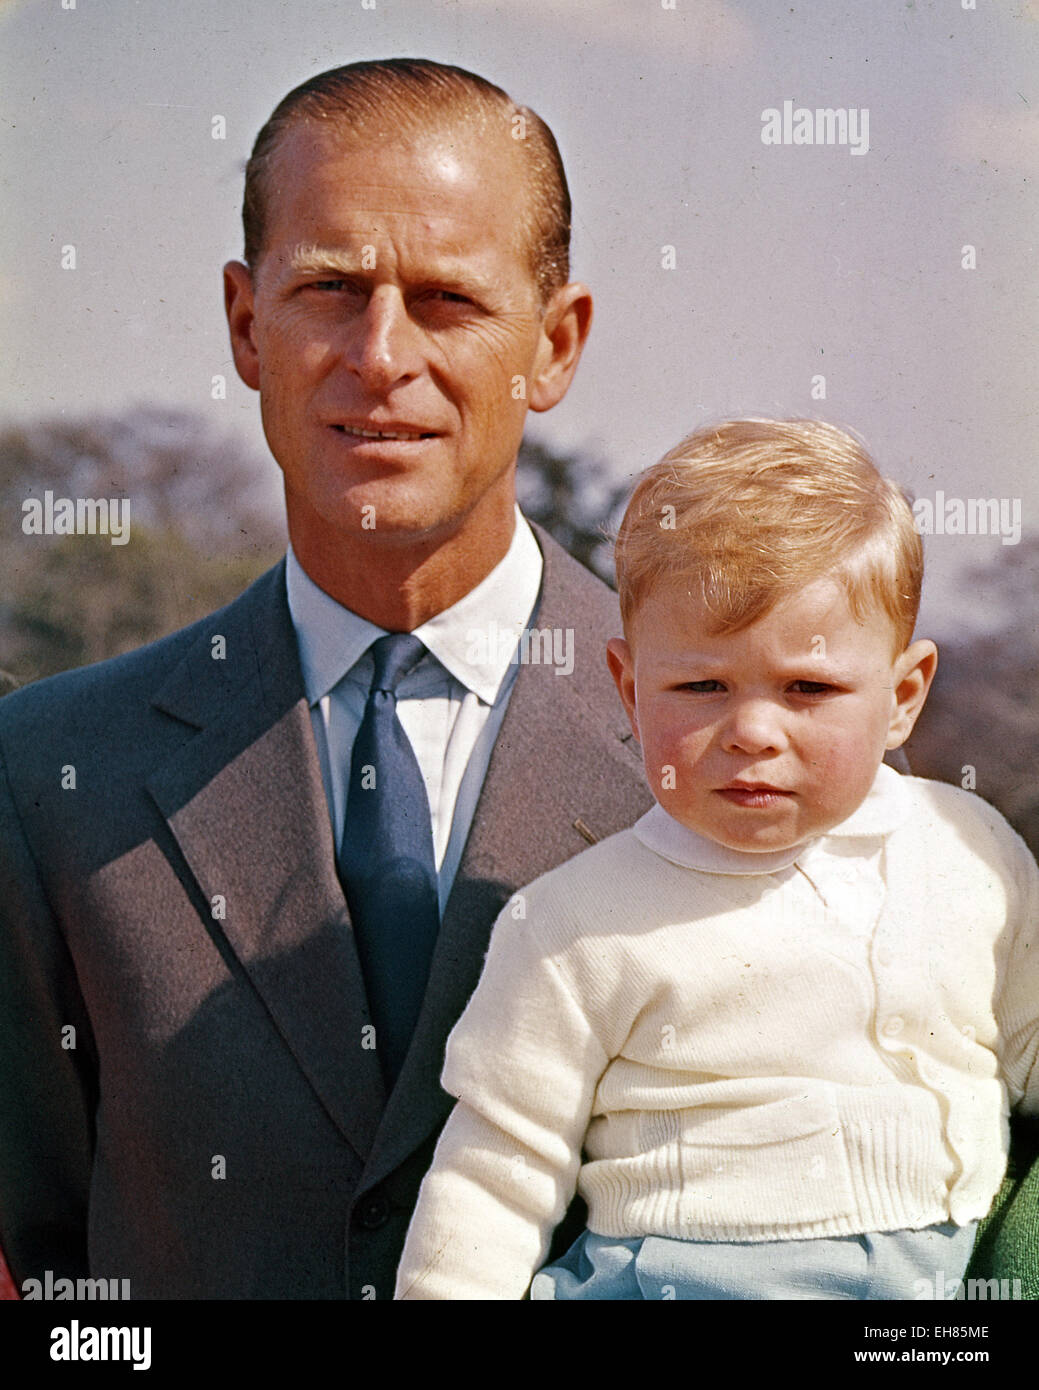 prince-philip-with-prince-charles-about-1950-EH85ME.jpg